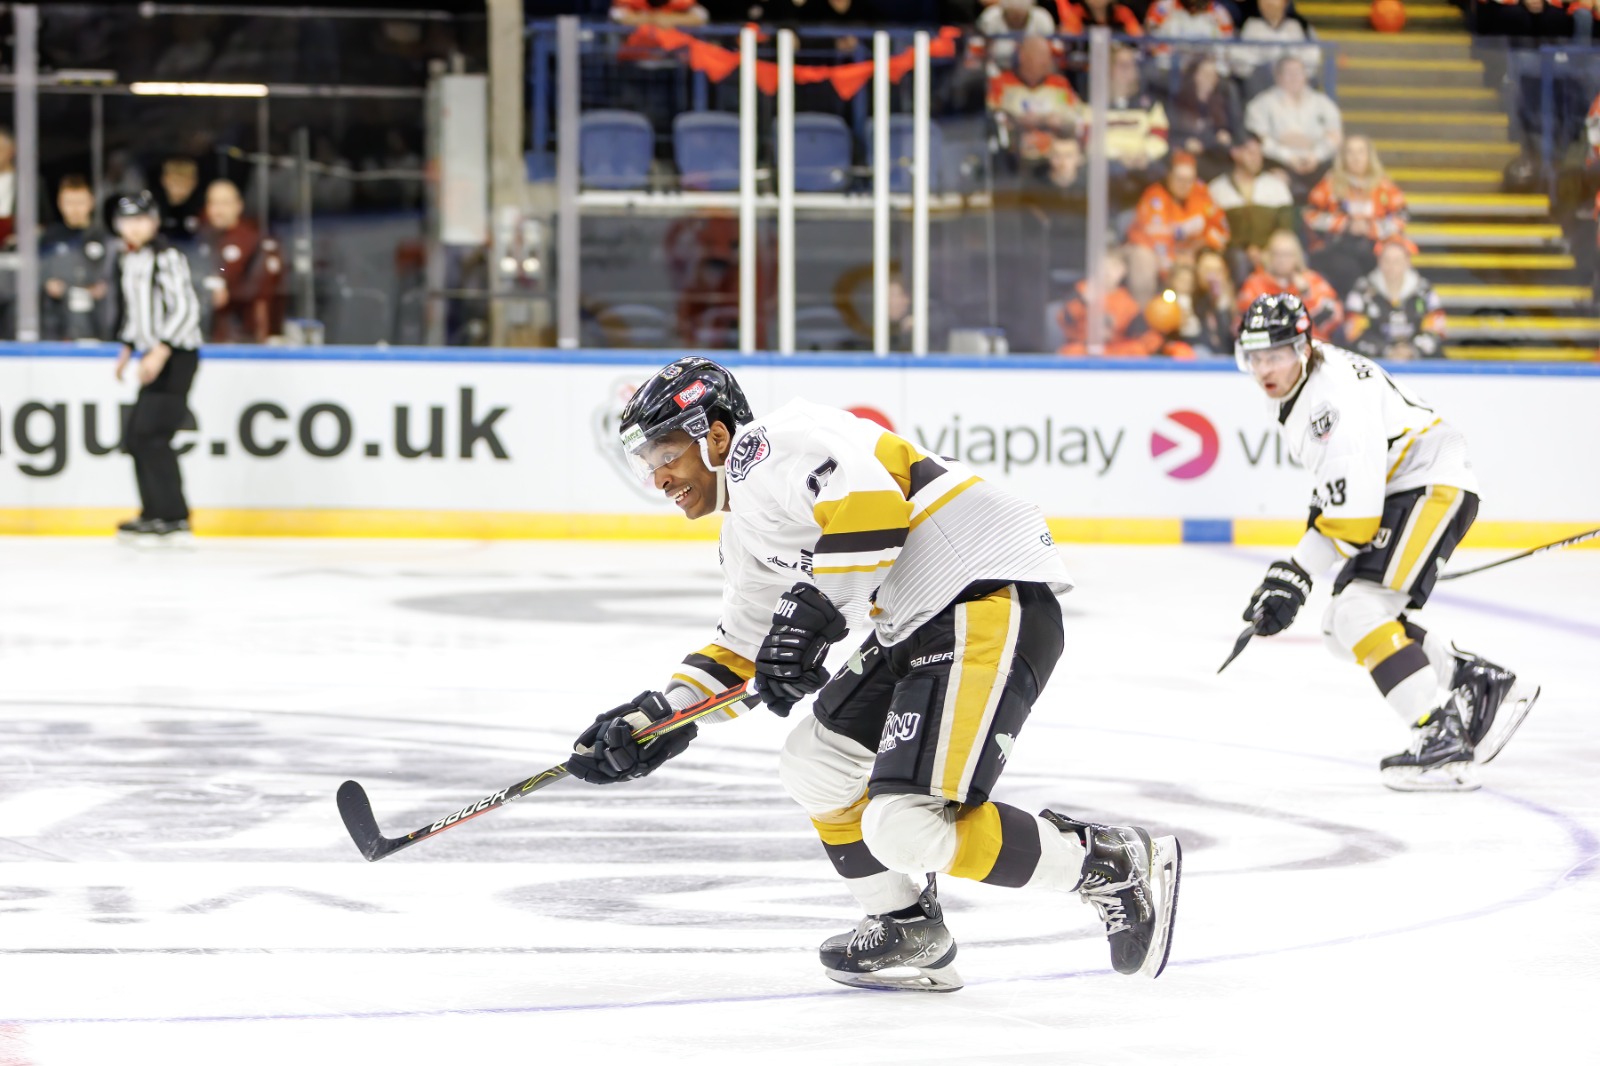 THIRD v FOURTH PLACE: STEELERS 7-4 PANTHERS Top Image